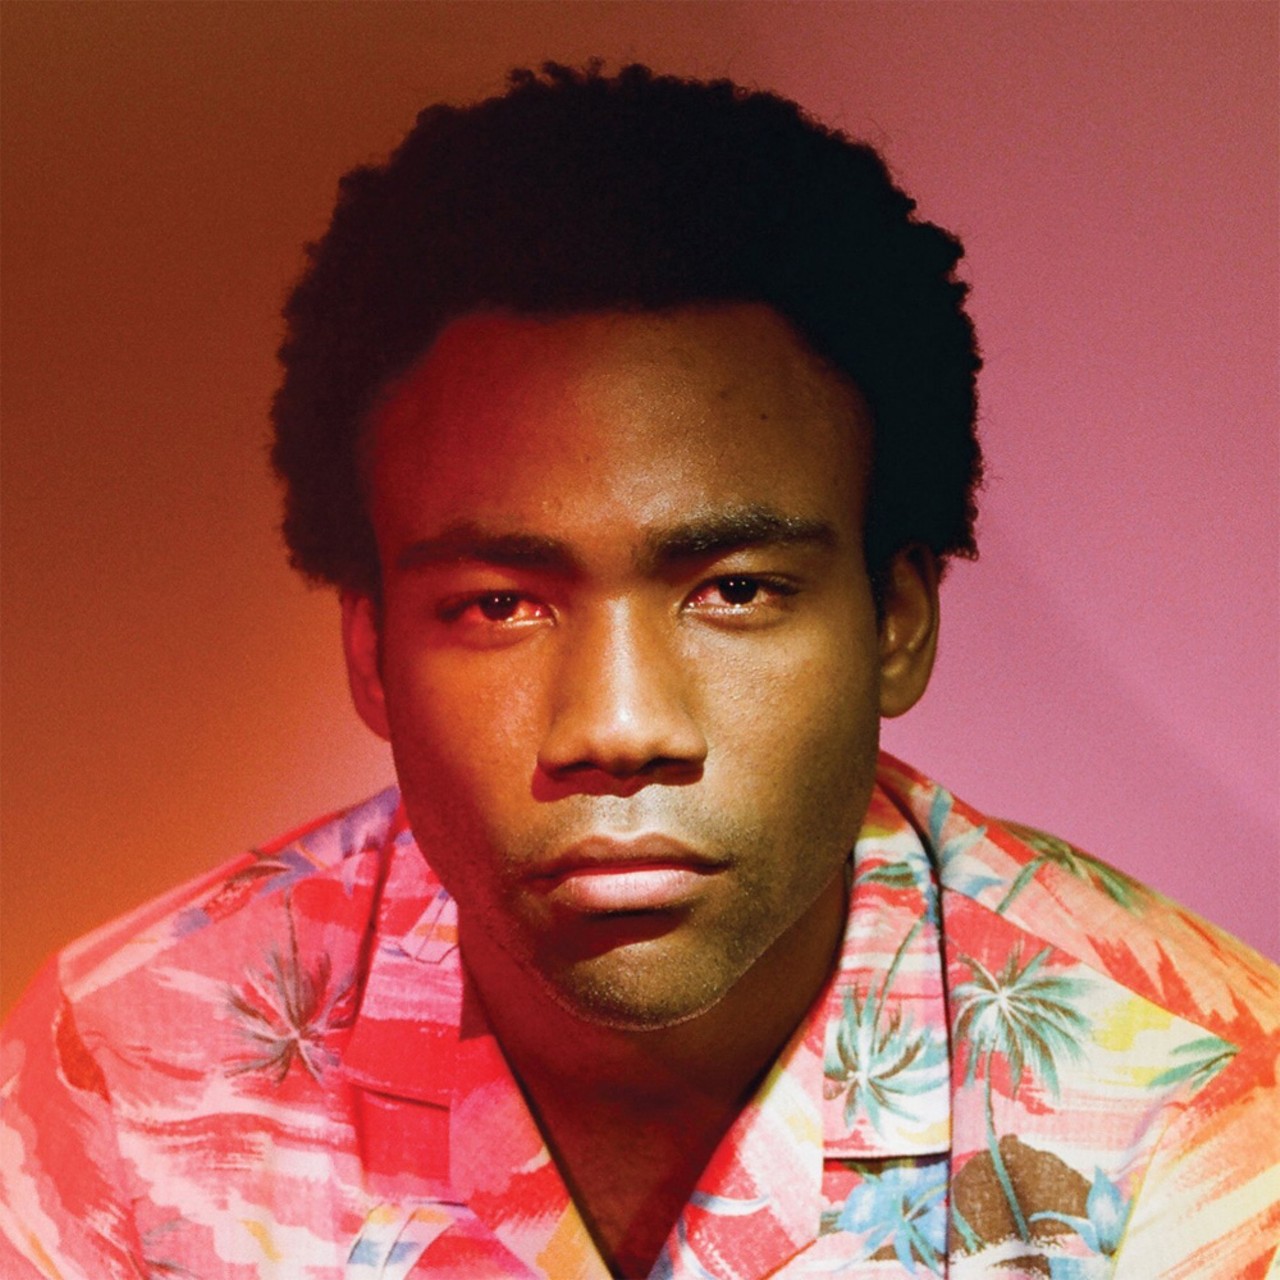  "Starlight," by Childish Gambino
On this Gambino track, DC Pierson references the 30 Rock episode (Donald Glover aka Childish Gambino used to write for the show), "Cleveland," where Liz Lemon's boyfriend (Floyd) leaves her to move back to the city. "On some Liz Lemon movin' back to Cleveland."   
Because the Internet album art